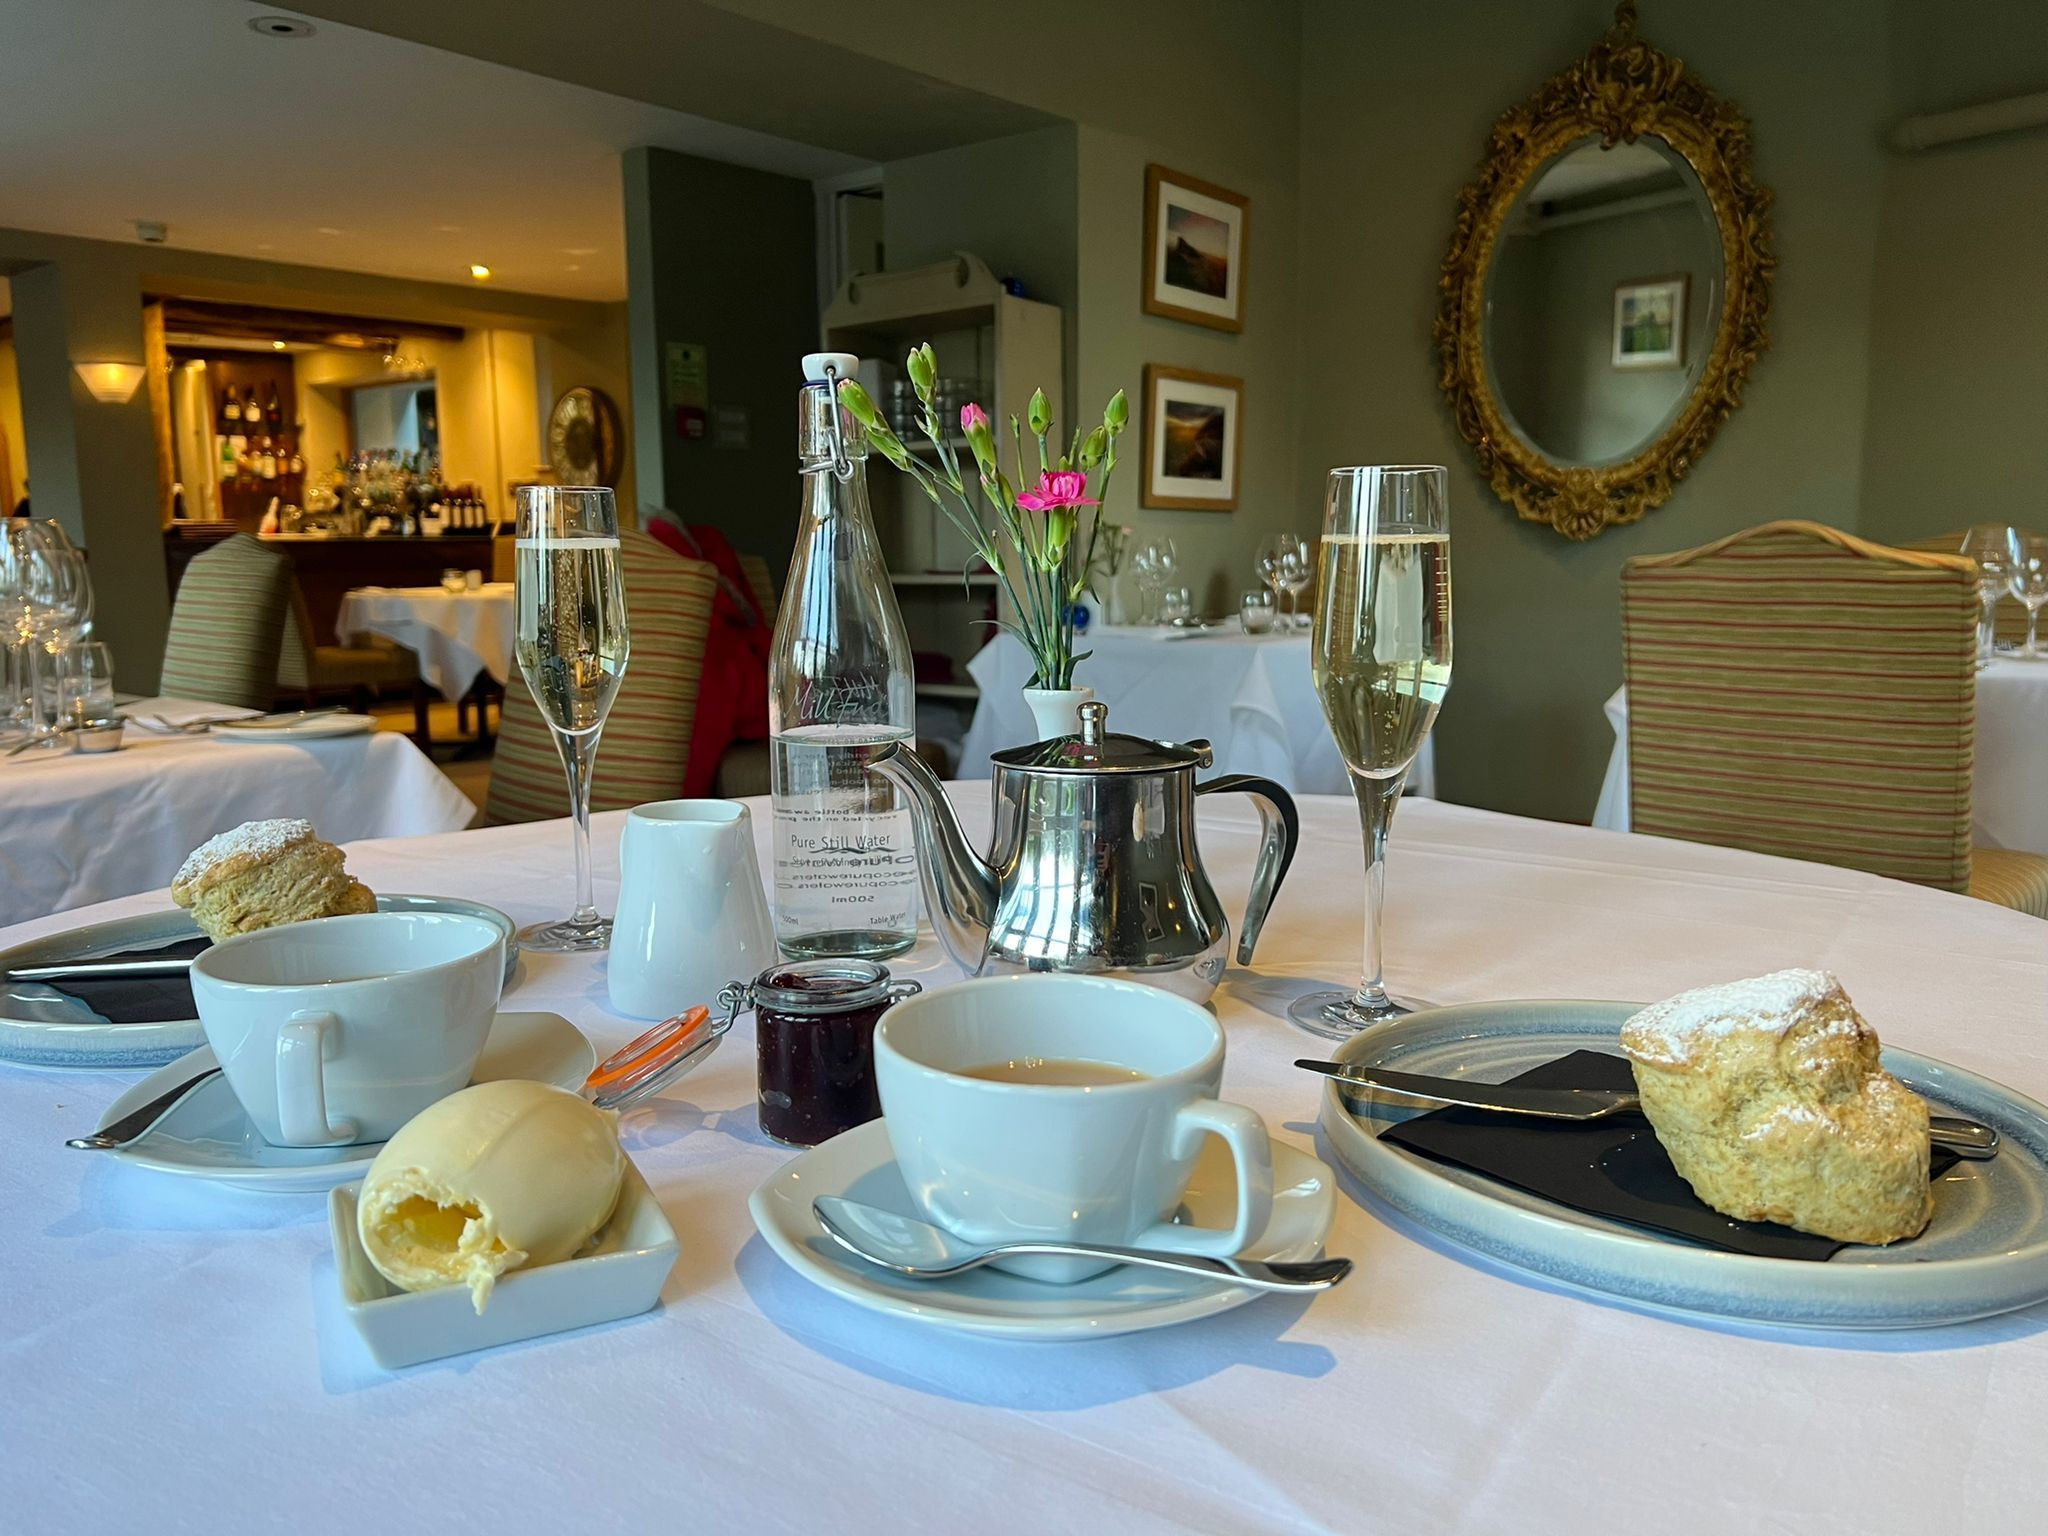 Dartmoor cream tea and afternoon tea at award winning mill end country hotel